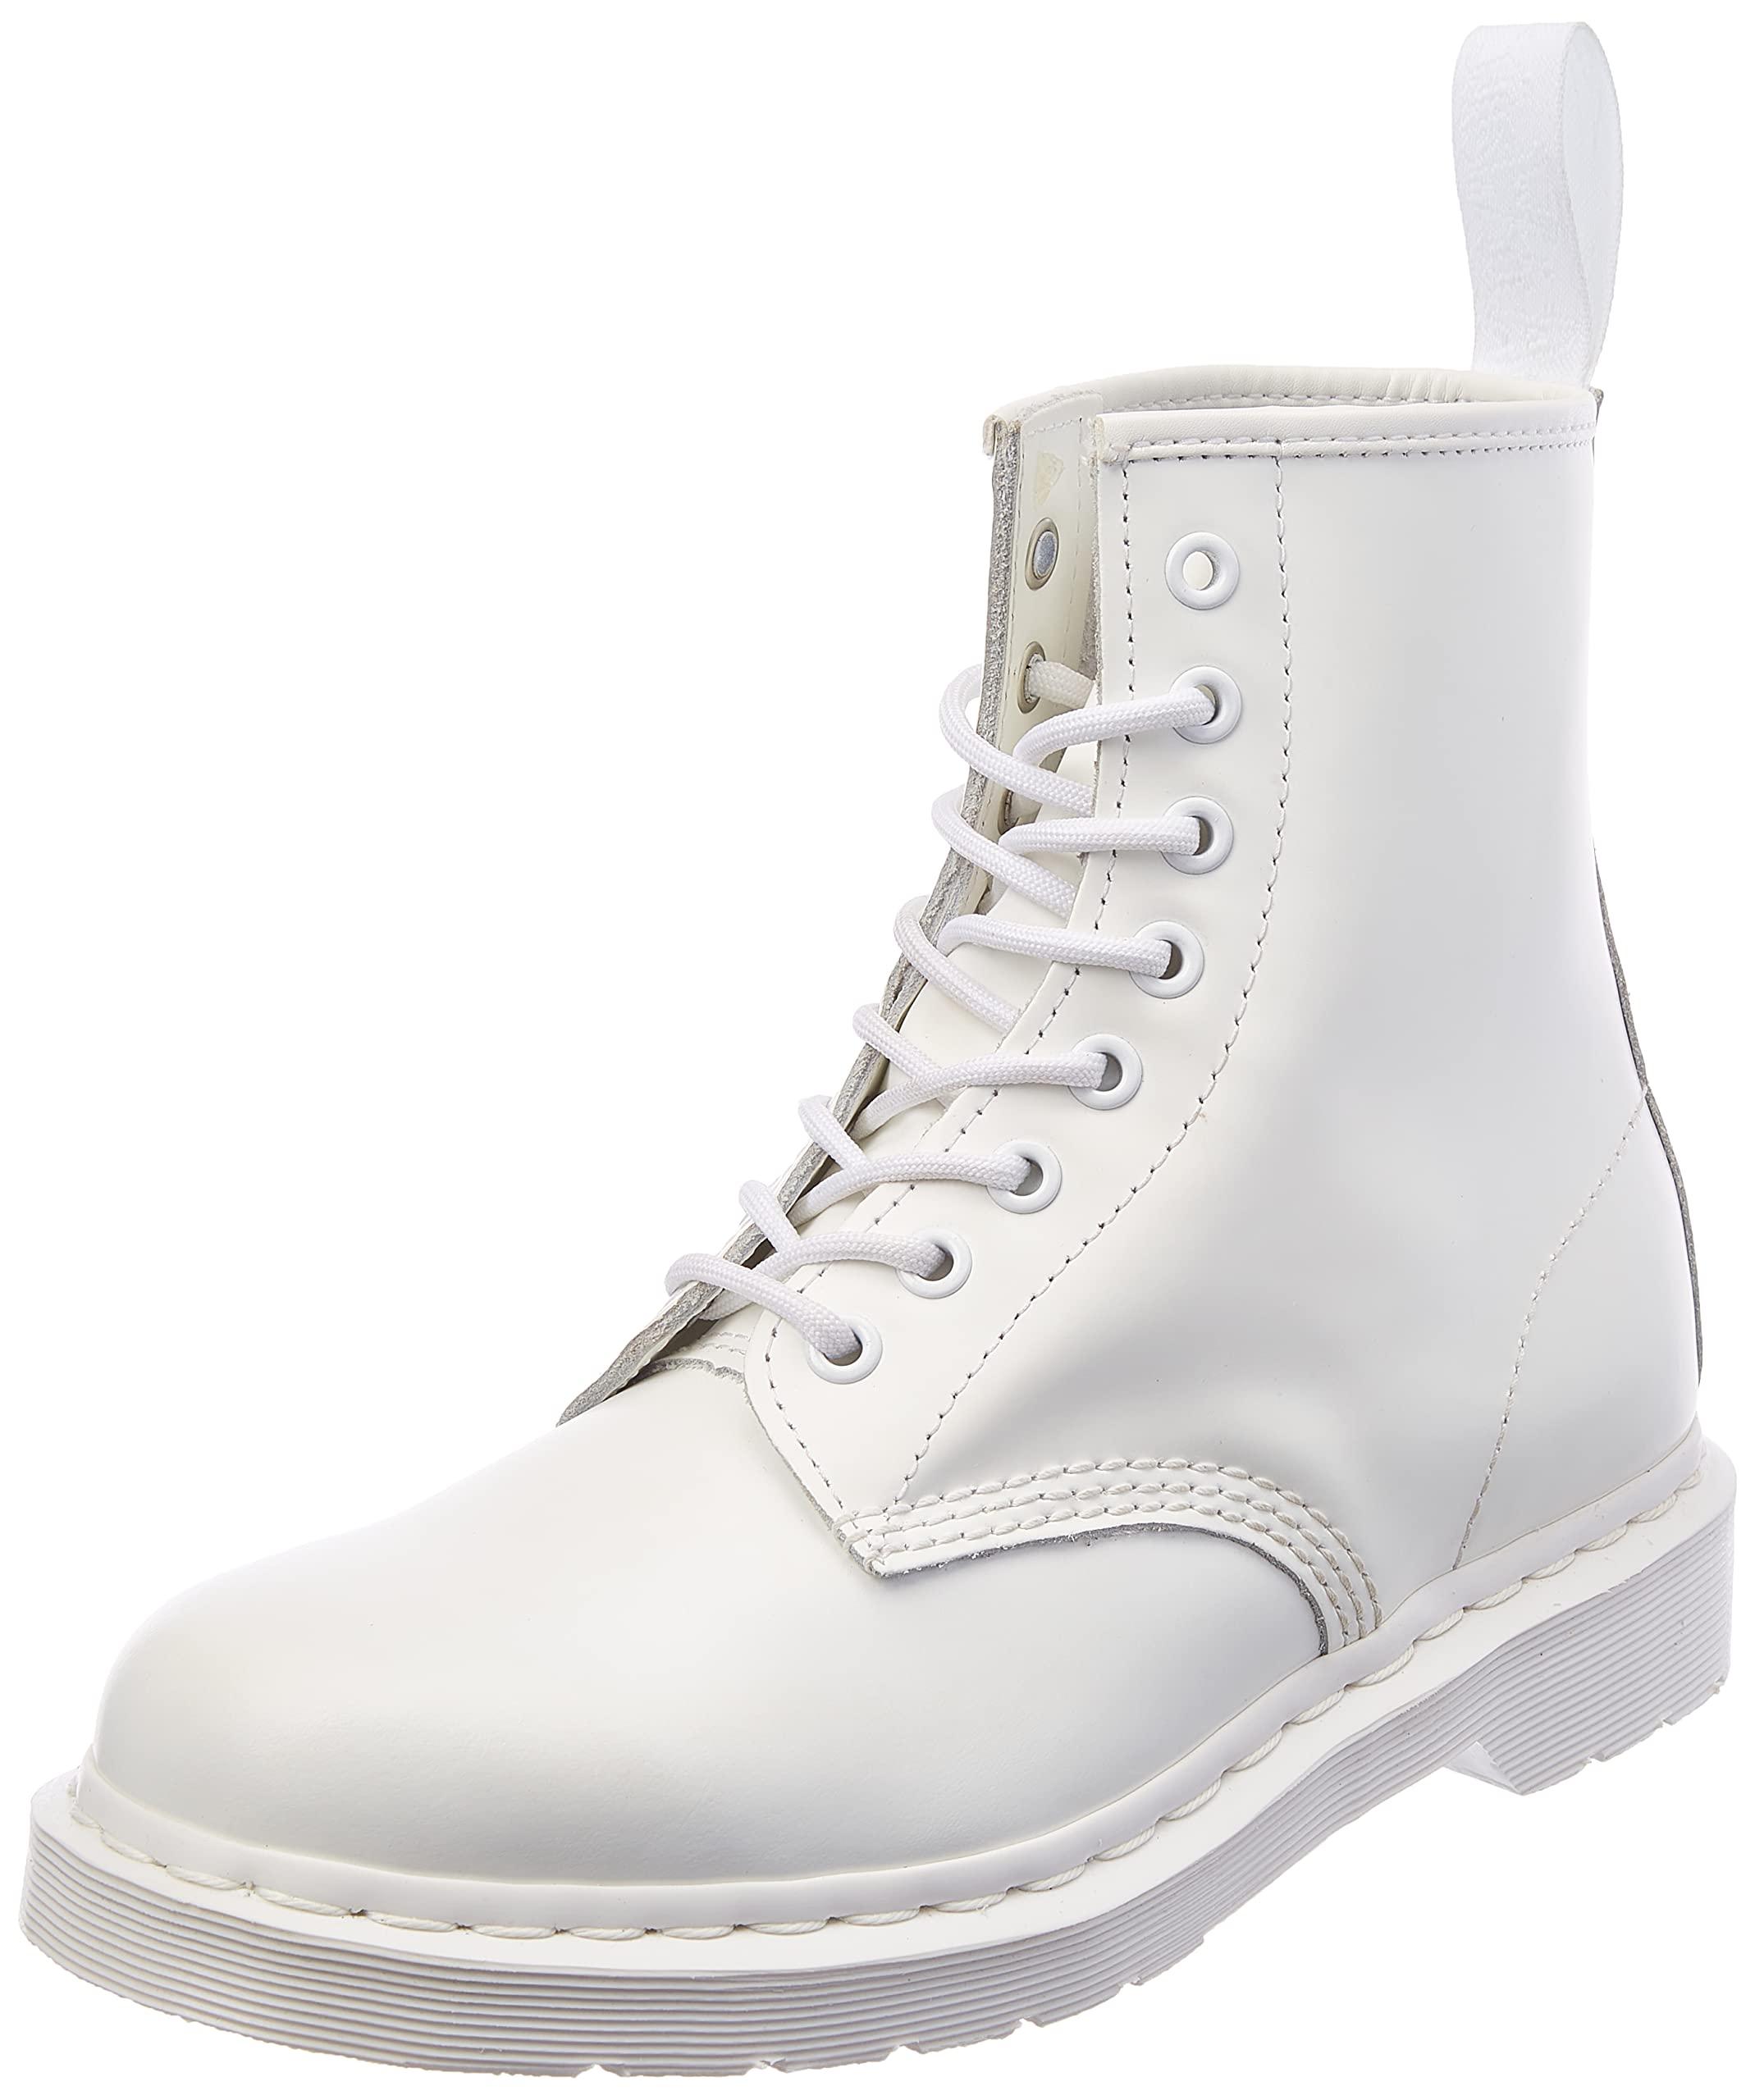 Dr. Martens , 1460 Mono 8-eye Leather Boot For And , White Smooth, 11 Us  /10 Us | Lyst